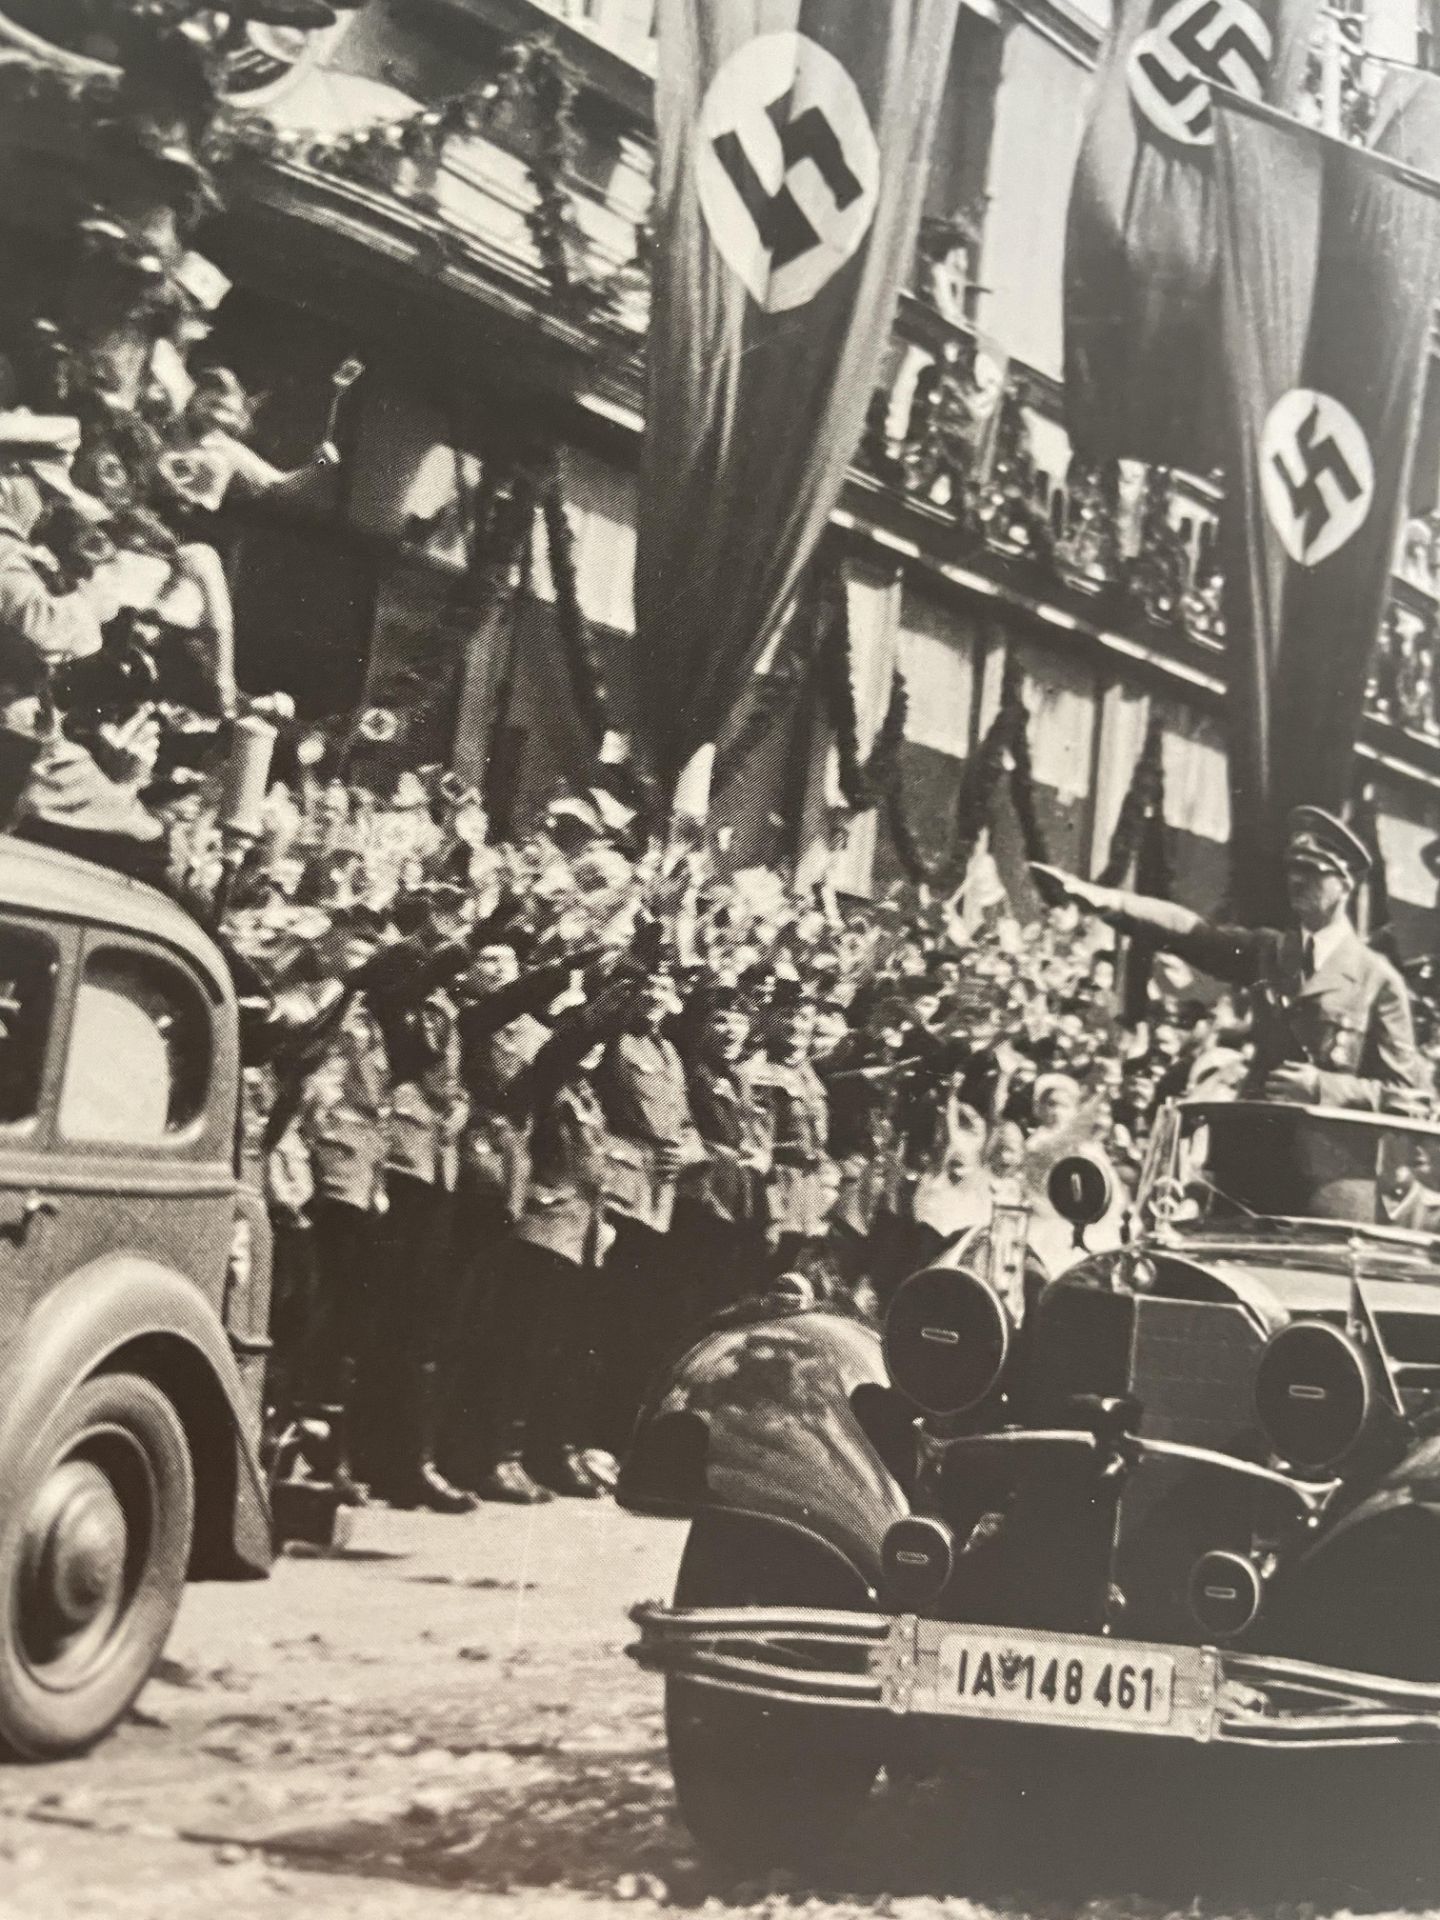 Germany "WWII, Adolf Hitler, Victory Parade" Print - Image 6 of 6